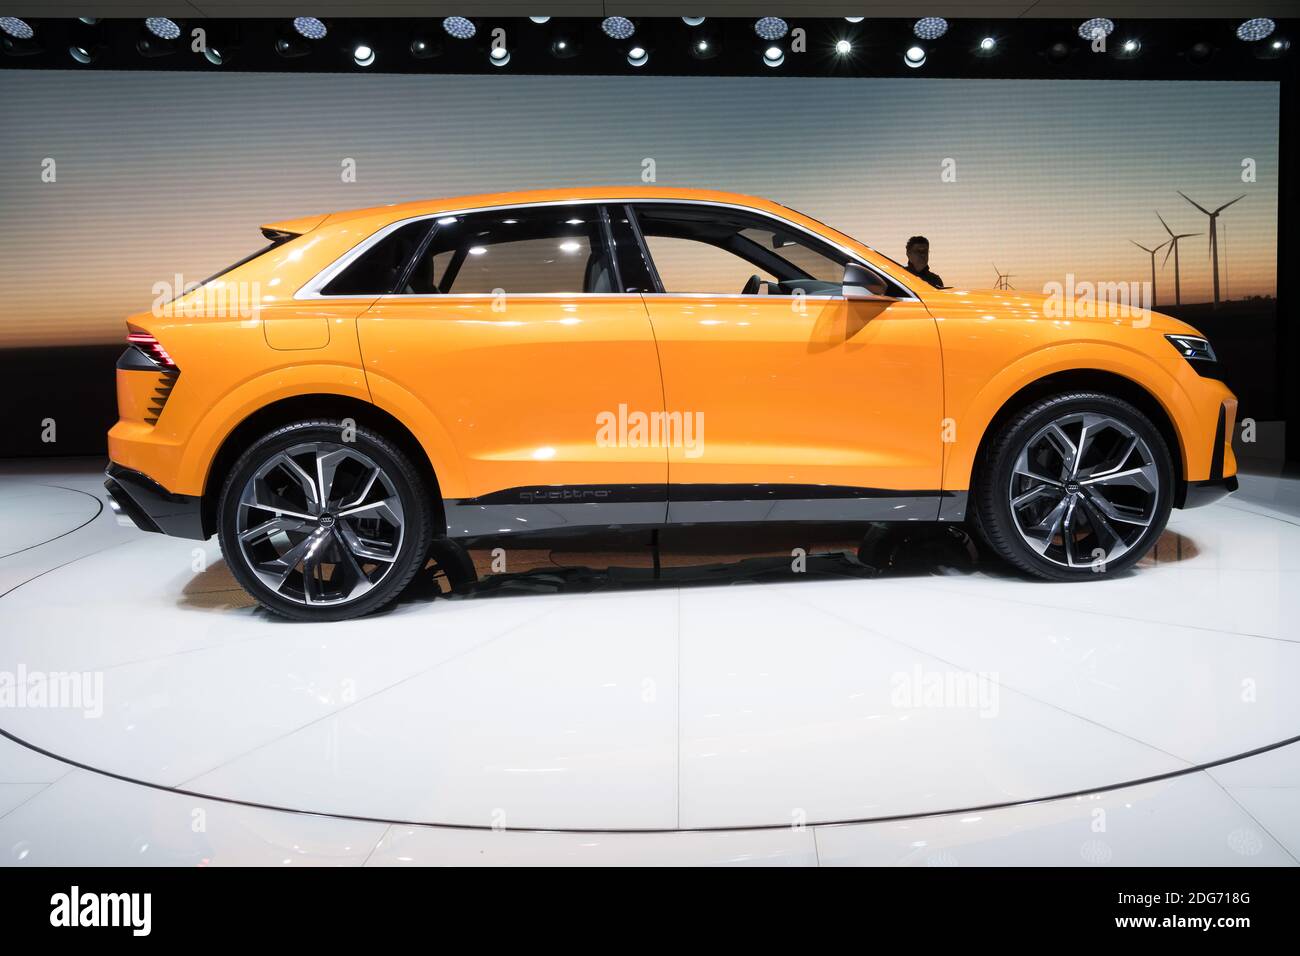 Audi Q8 Sport Concept is on display during the 87th Geneva International  Motor Show at Palexpo Exhibition Centre in Geneva, Switzerland on March 08,  2017. The show opens to the public on